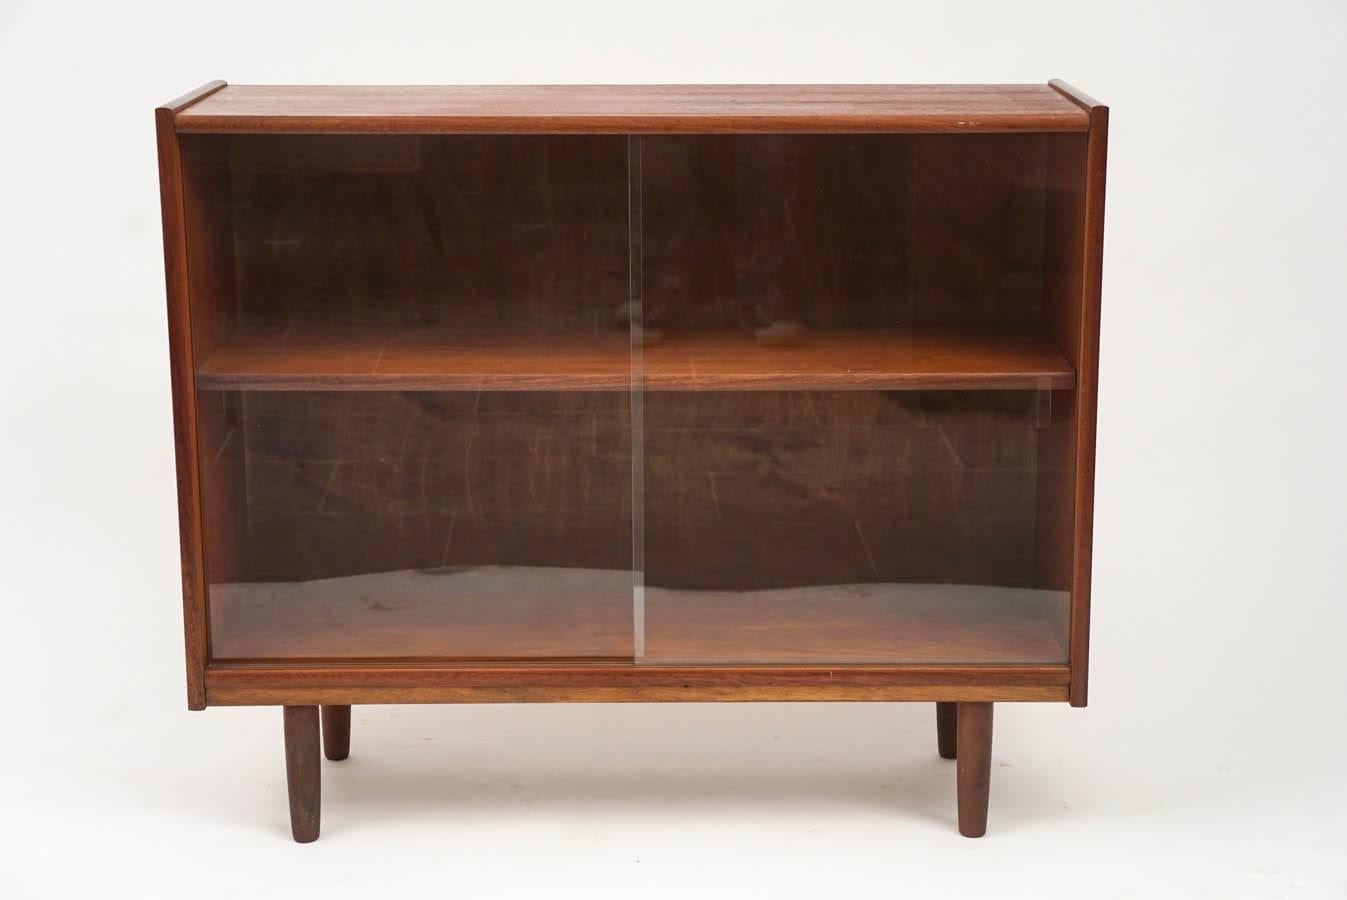 Nice small-scale Danish teak bookcase with sliding glass doors. The interior has one fixed shelf. 9 1/2